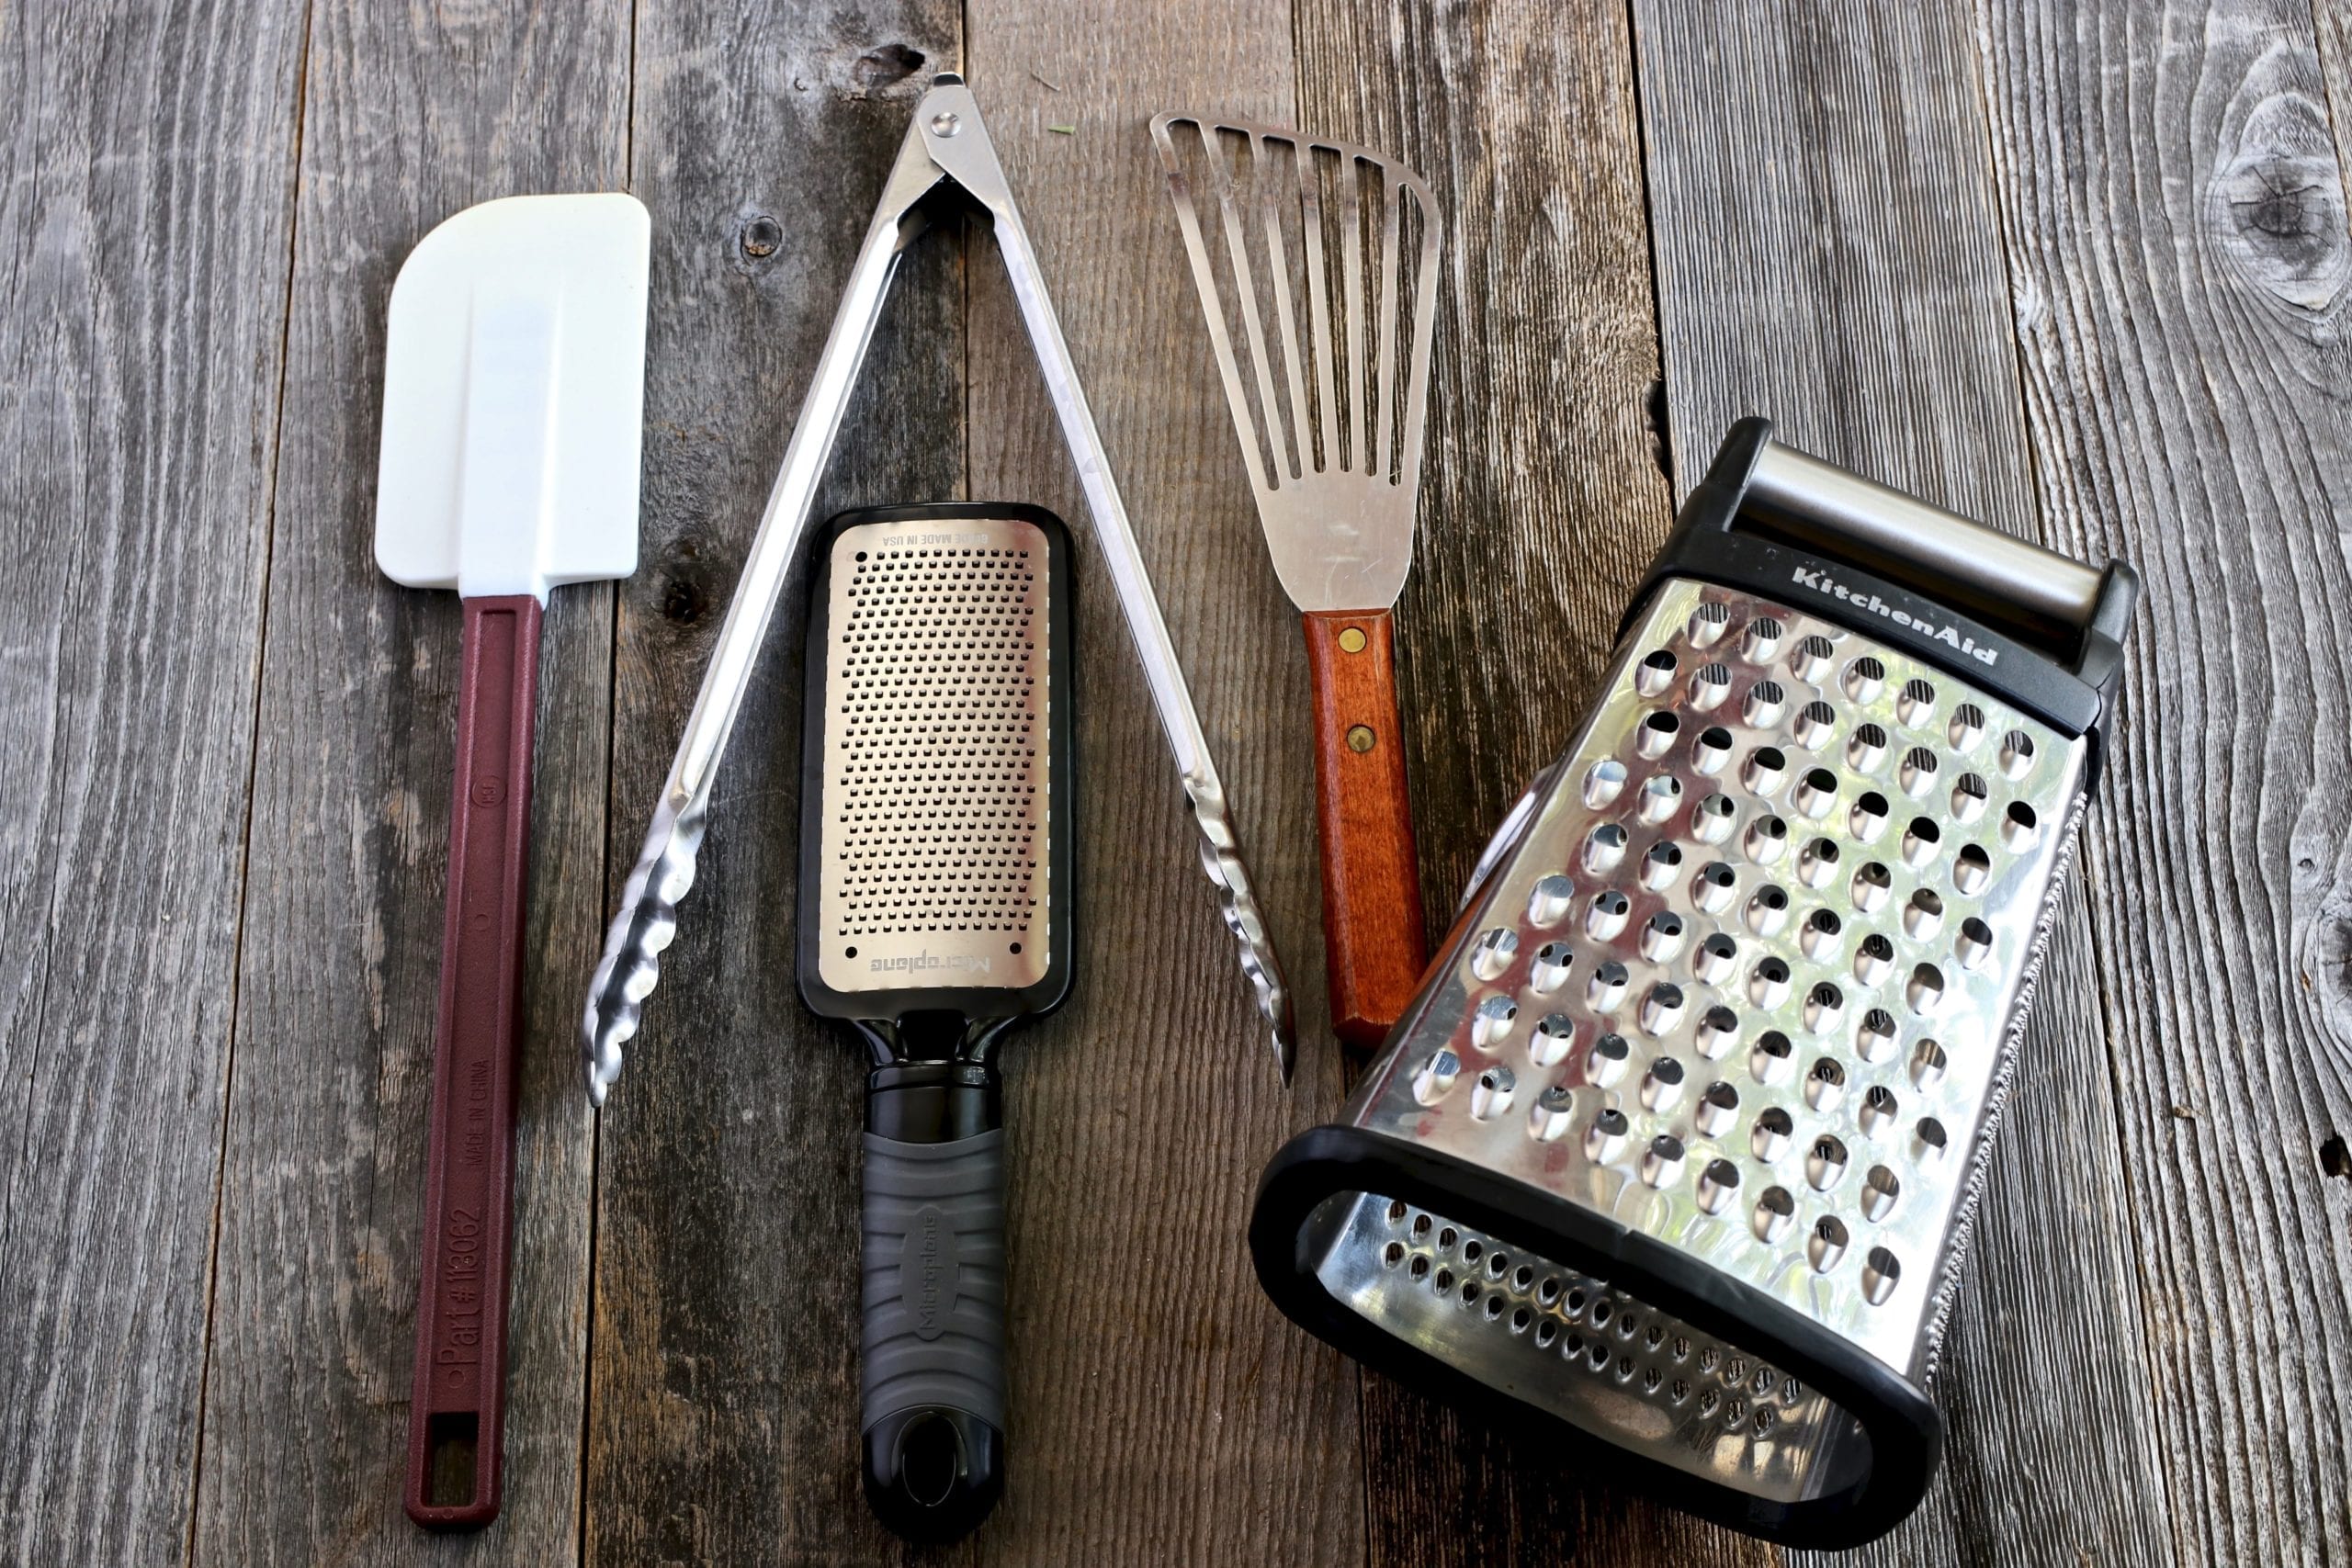 You Need This: Microplane Box Grater : Kitchen Detail